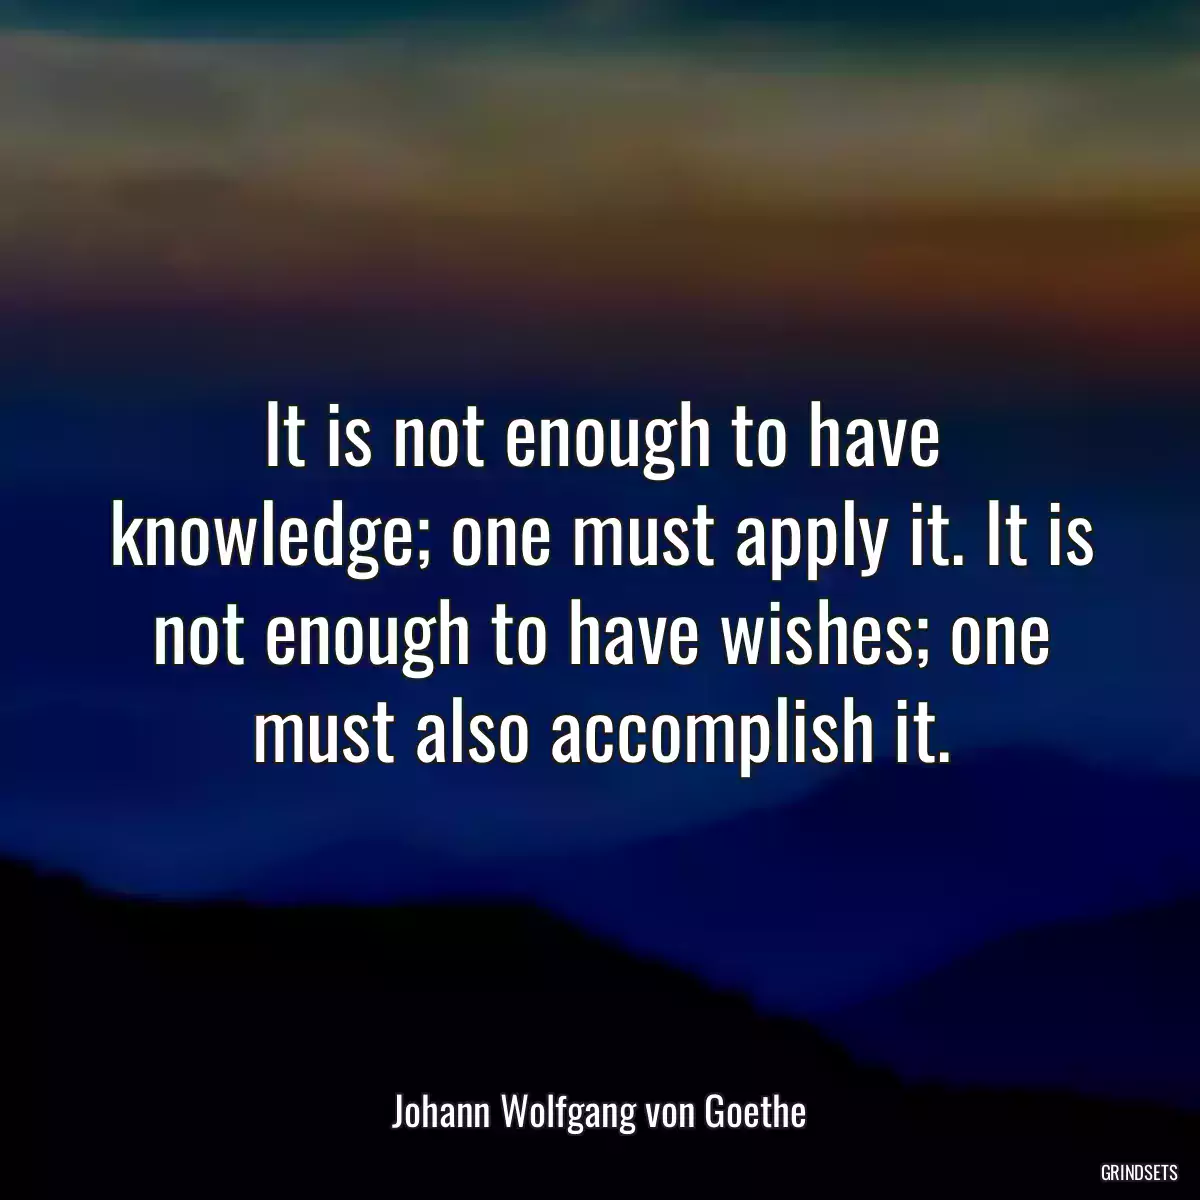 It is not enough to have knowledge; one must apply it. It is not enough to have wishes; one must also accomplish it.